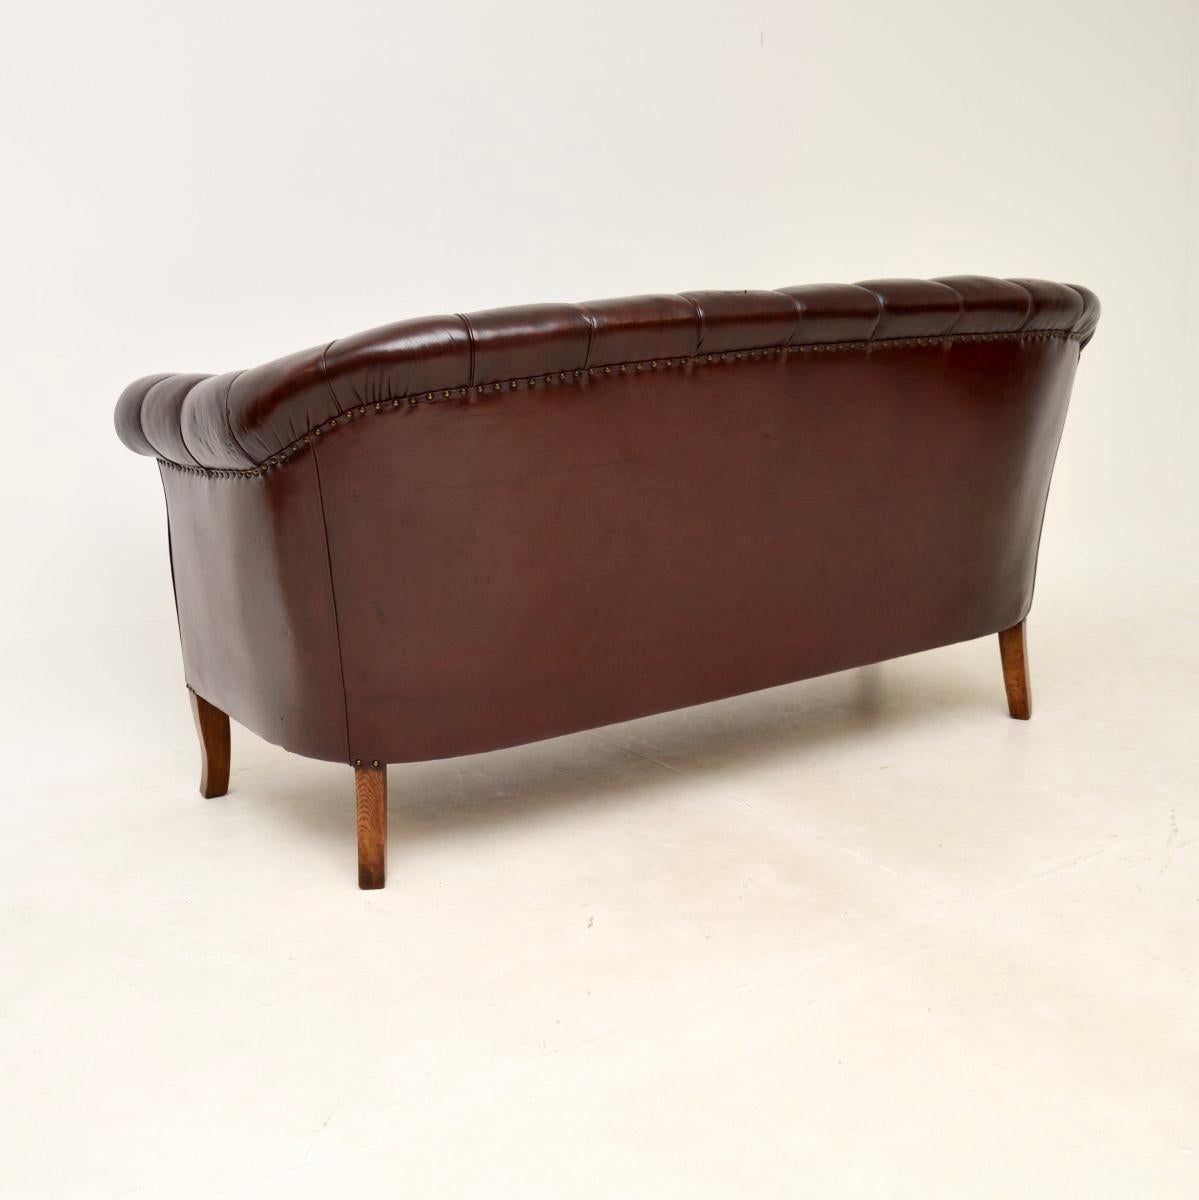 Early 20th Century Antique Swedish Leather Sofa For Sale